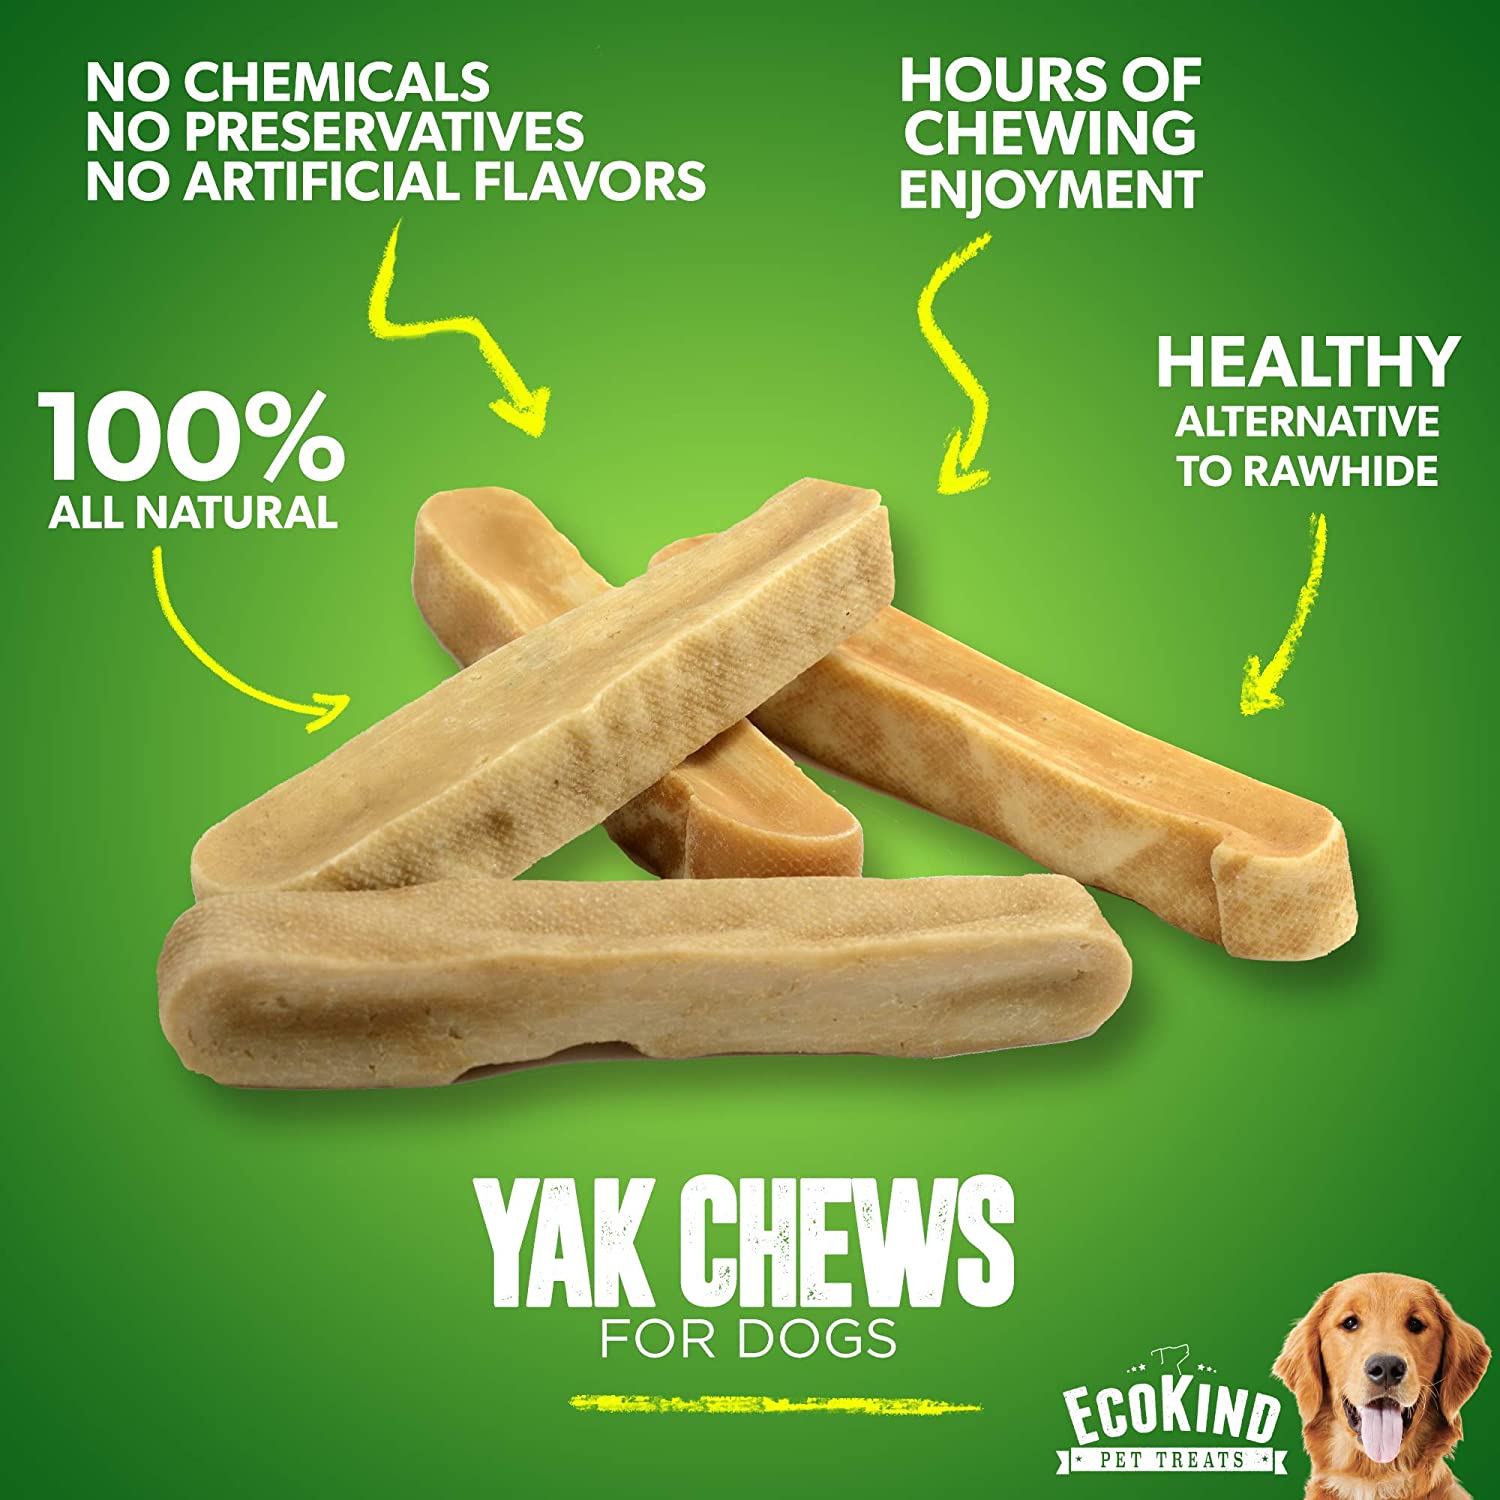 EcoKind Yak Chews for Dogs - 100% all-natural, no chemicals, no preservatives, no artificial flavors - hours of chewing enjoyment, healthy alternative to rawhide